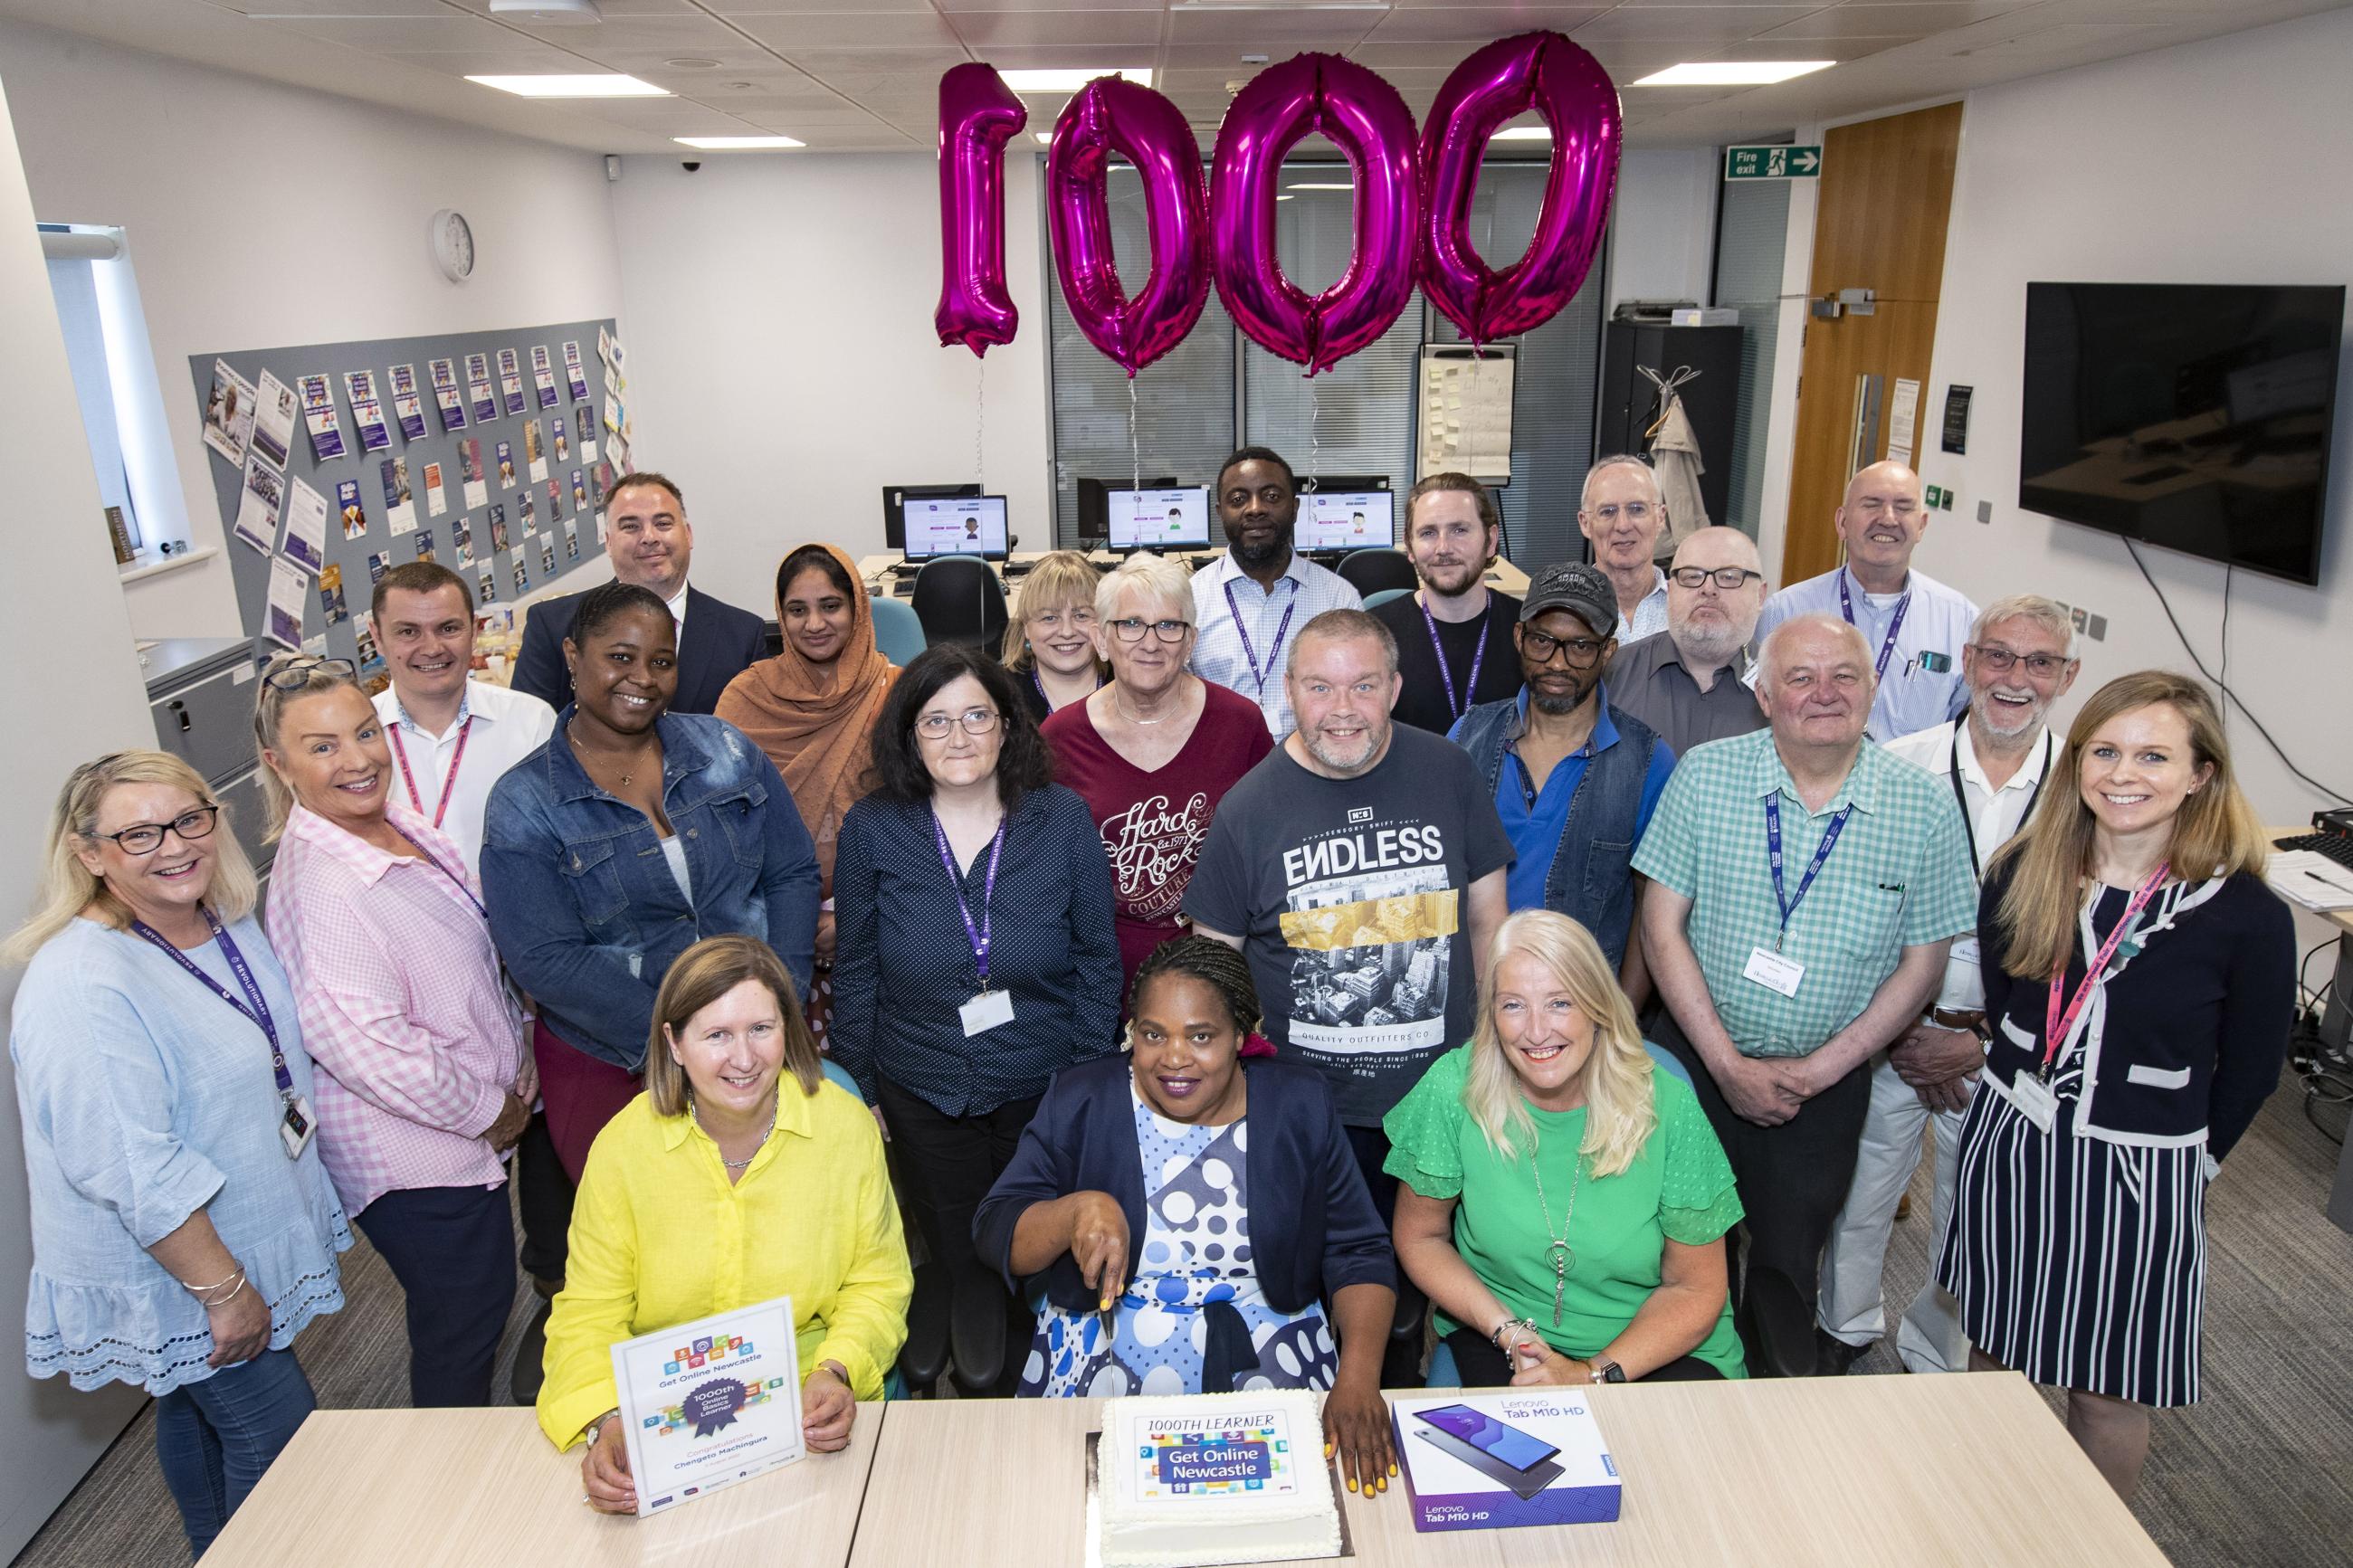 A celebration of Get Online Newcast;e's 1000th learner